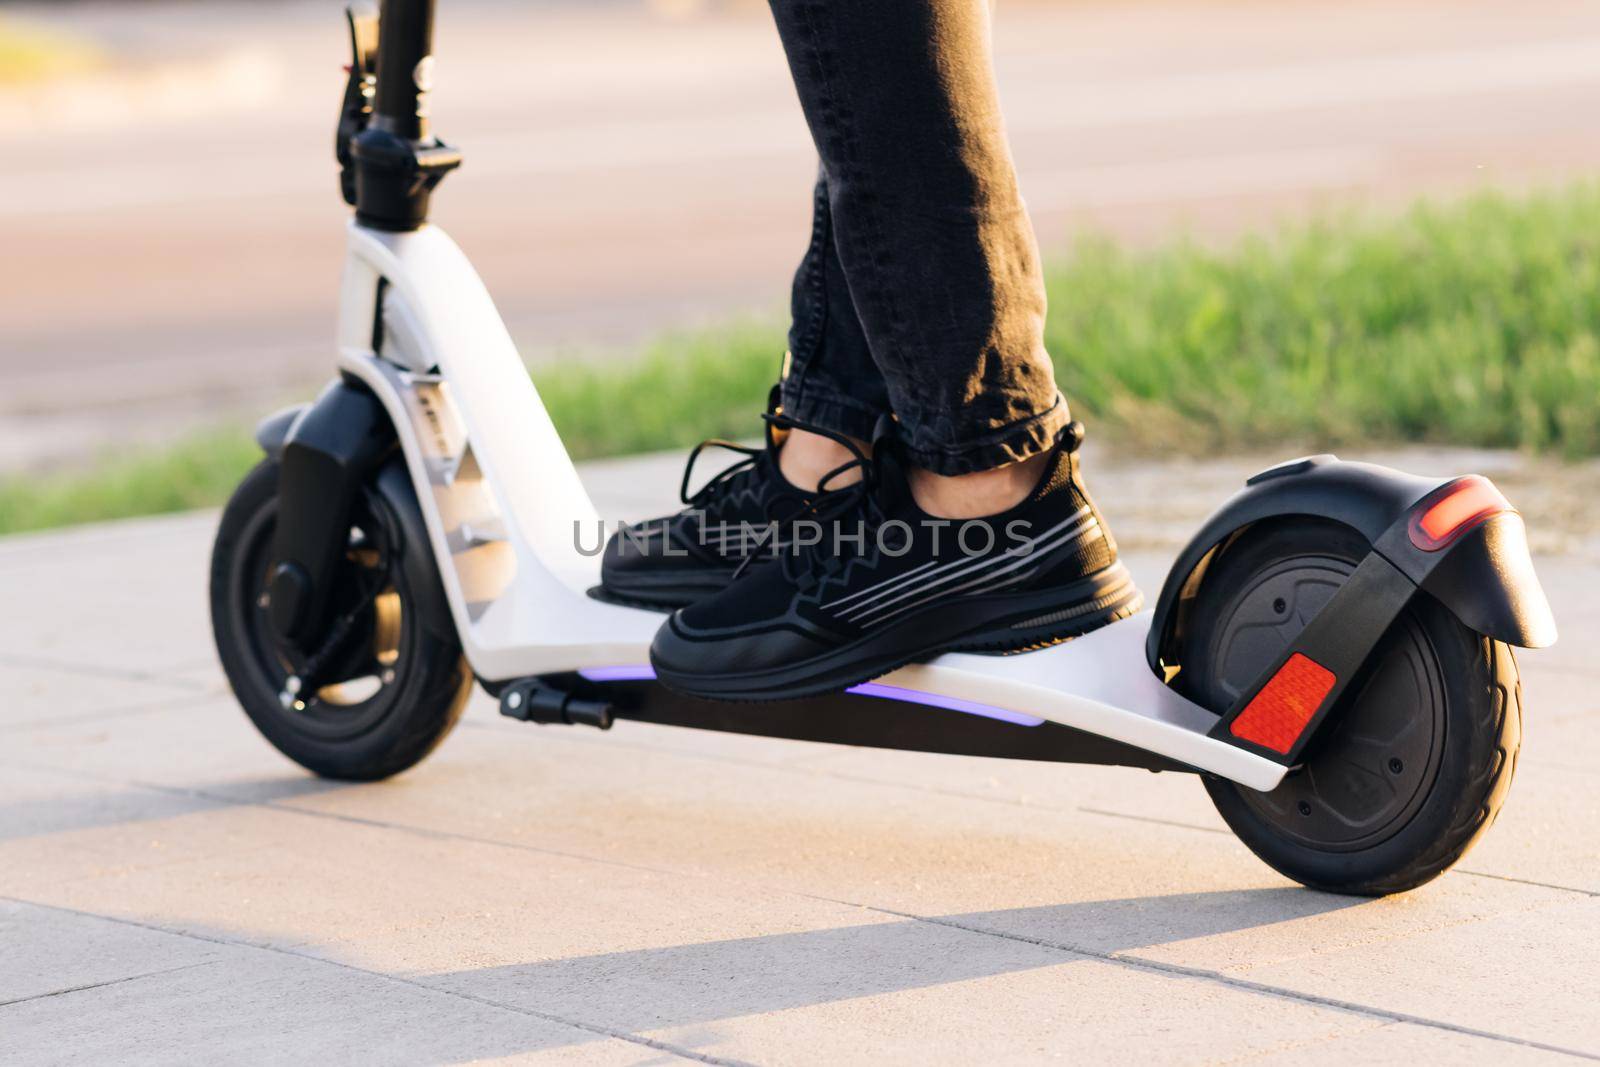 Male riding electric scooter. Modern transportation gadget and popular futuristic device among young people. Attractive man stands, scoots and rides on the electric kick scooter